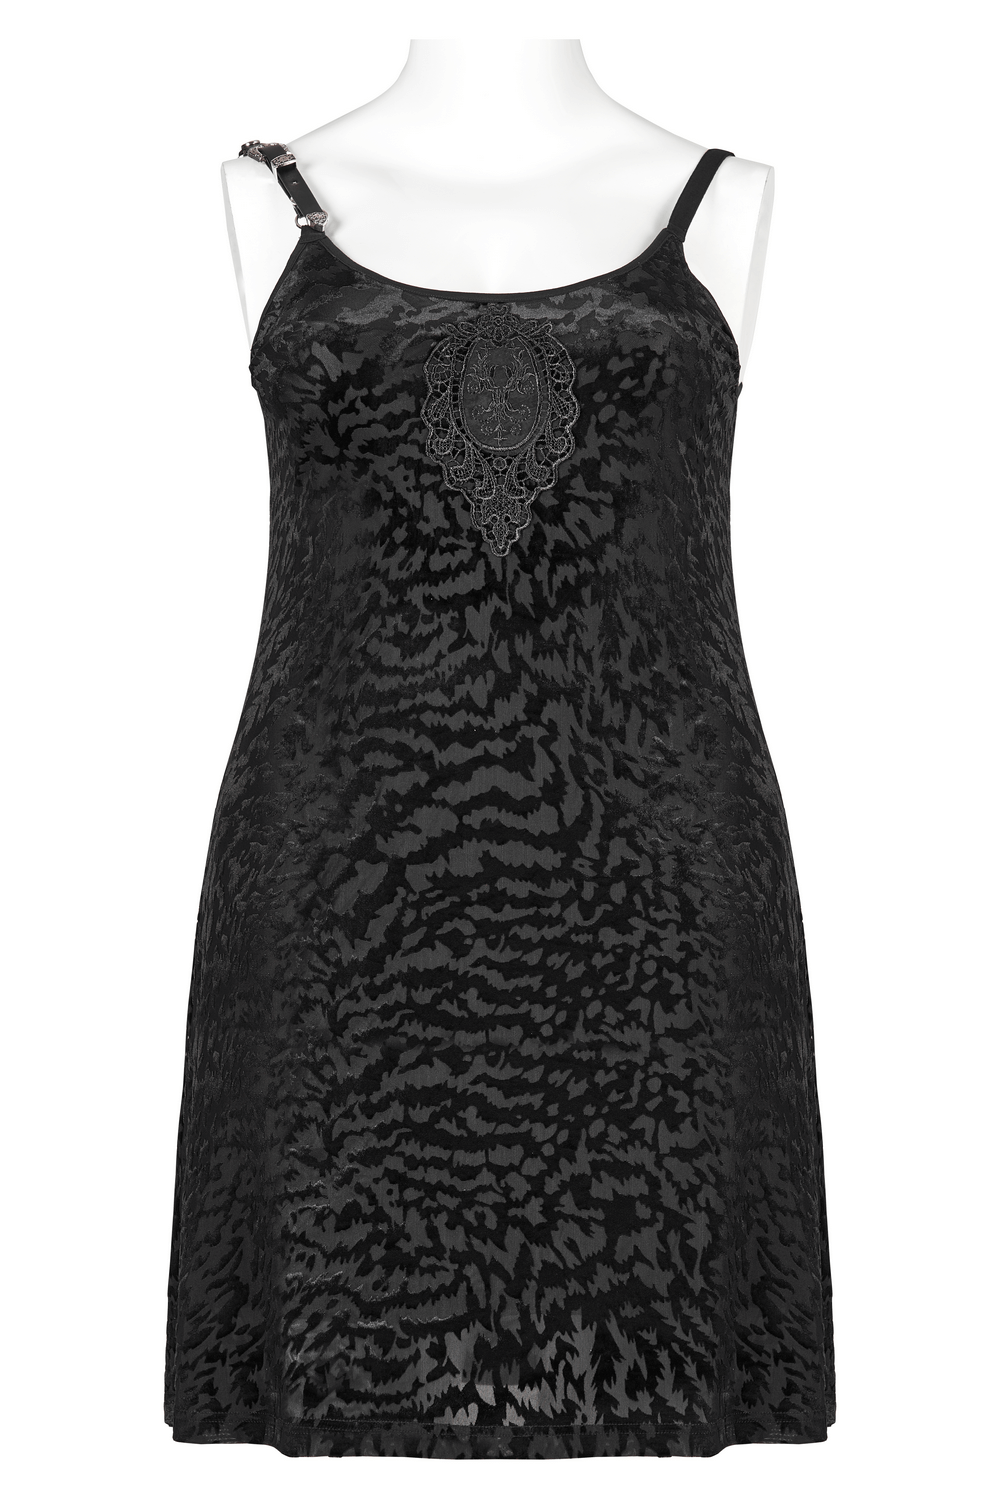 Velvet Gothic Dress with Removable Strap Loop - HARD'N'HEAVY